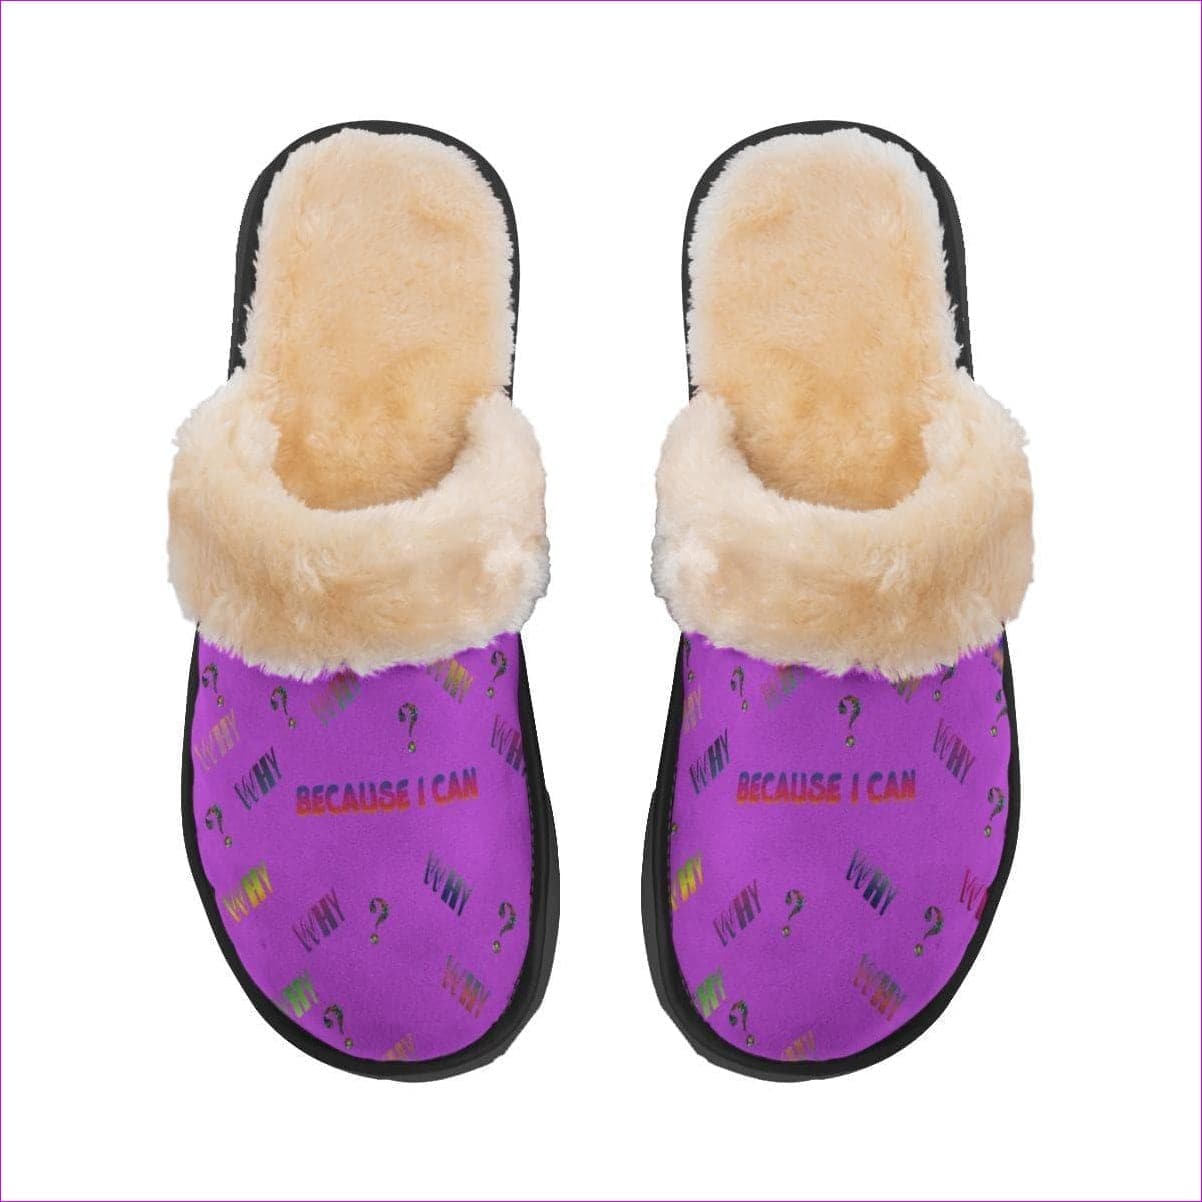 - Women's "Because I Can" Home Plush Slippers - womens slippers at TFC&H Co.